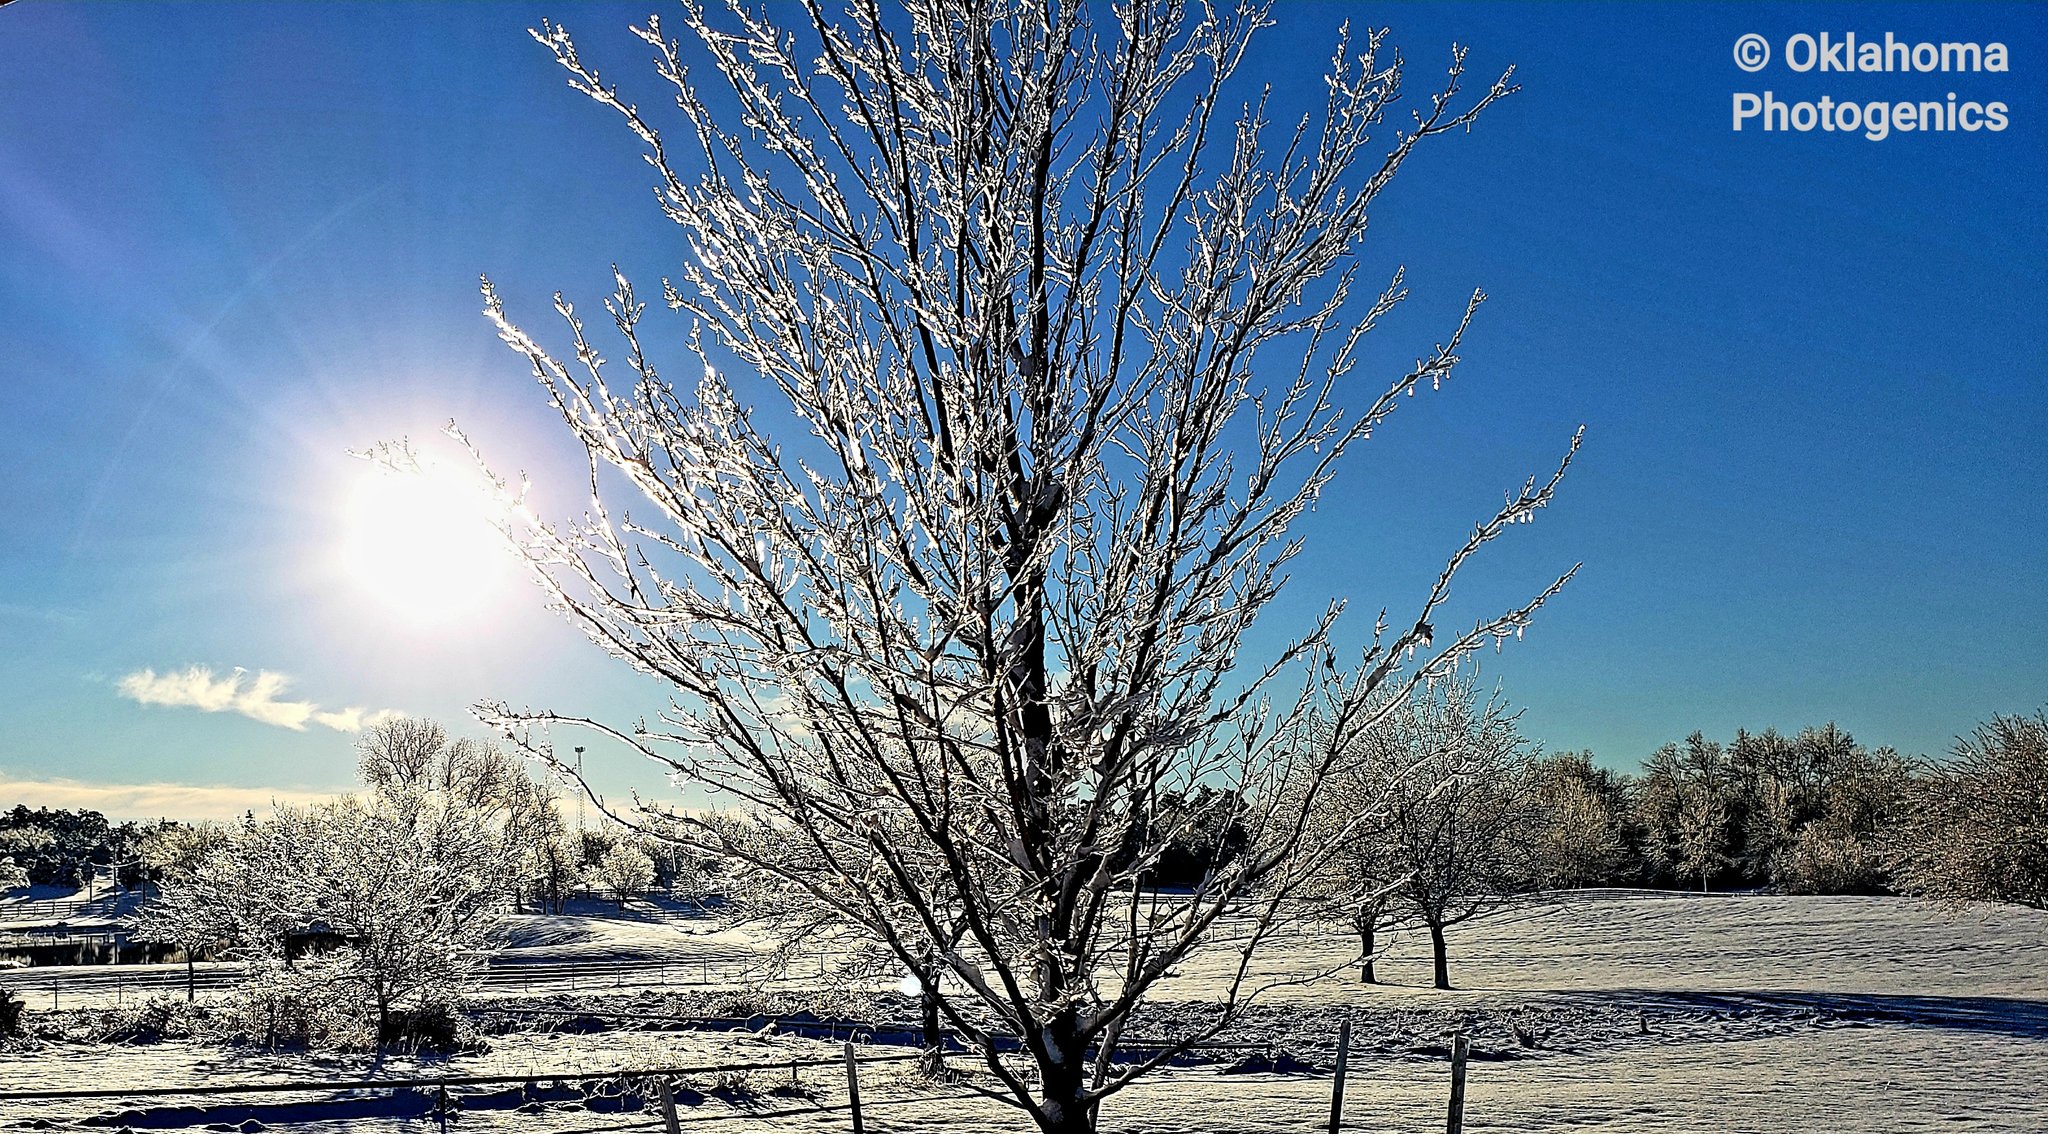 3rd Place The Glass Tree taken in Newcastle OK one morning after snowfall by Lee Kuhlman @leekuhlman